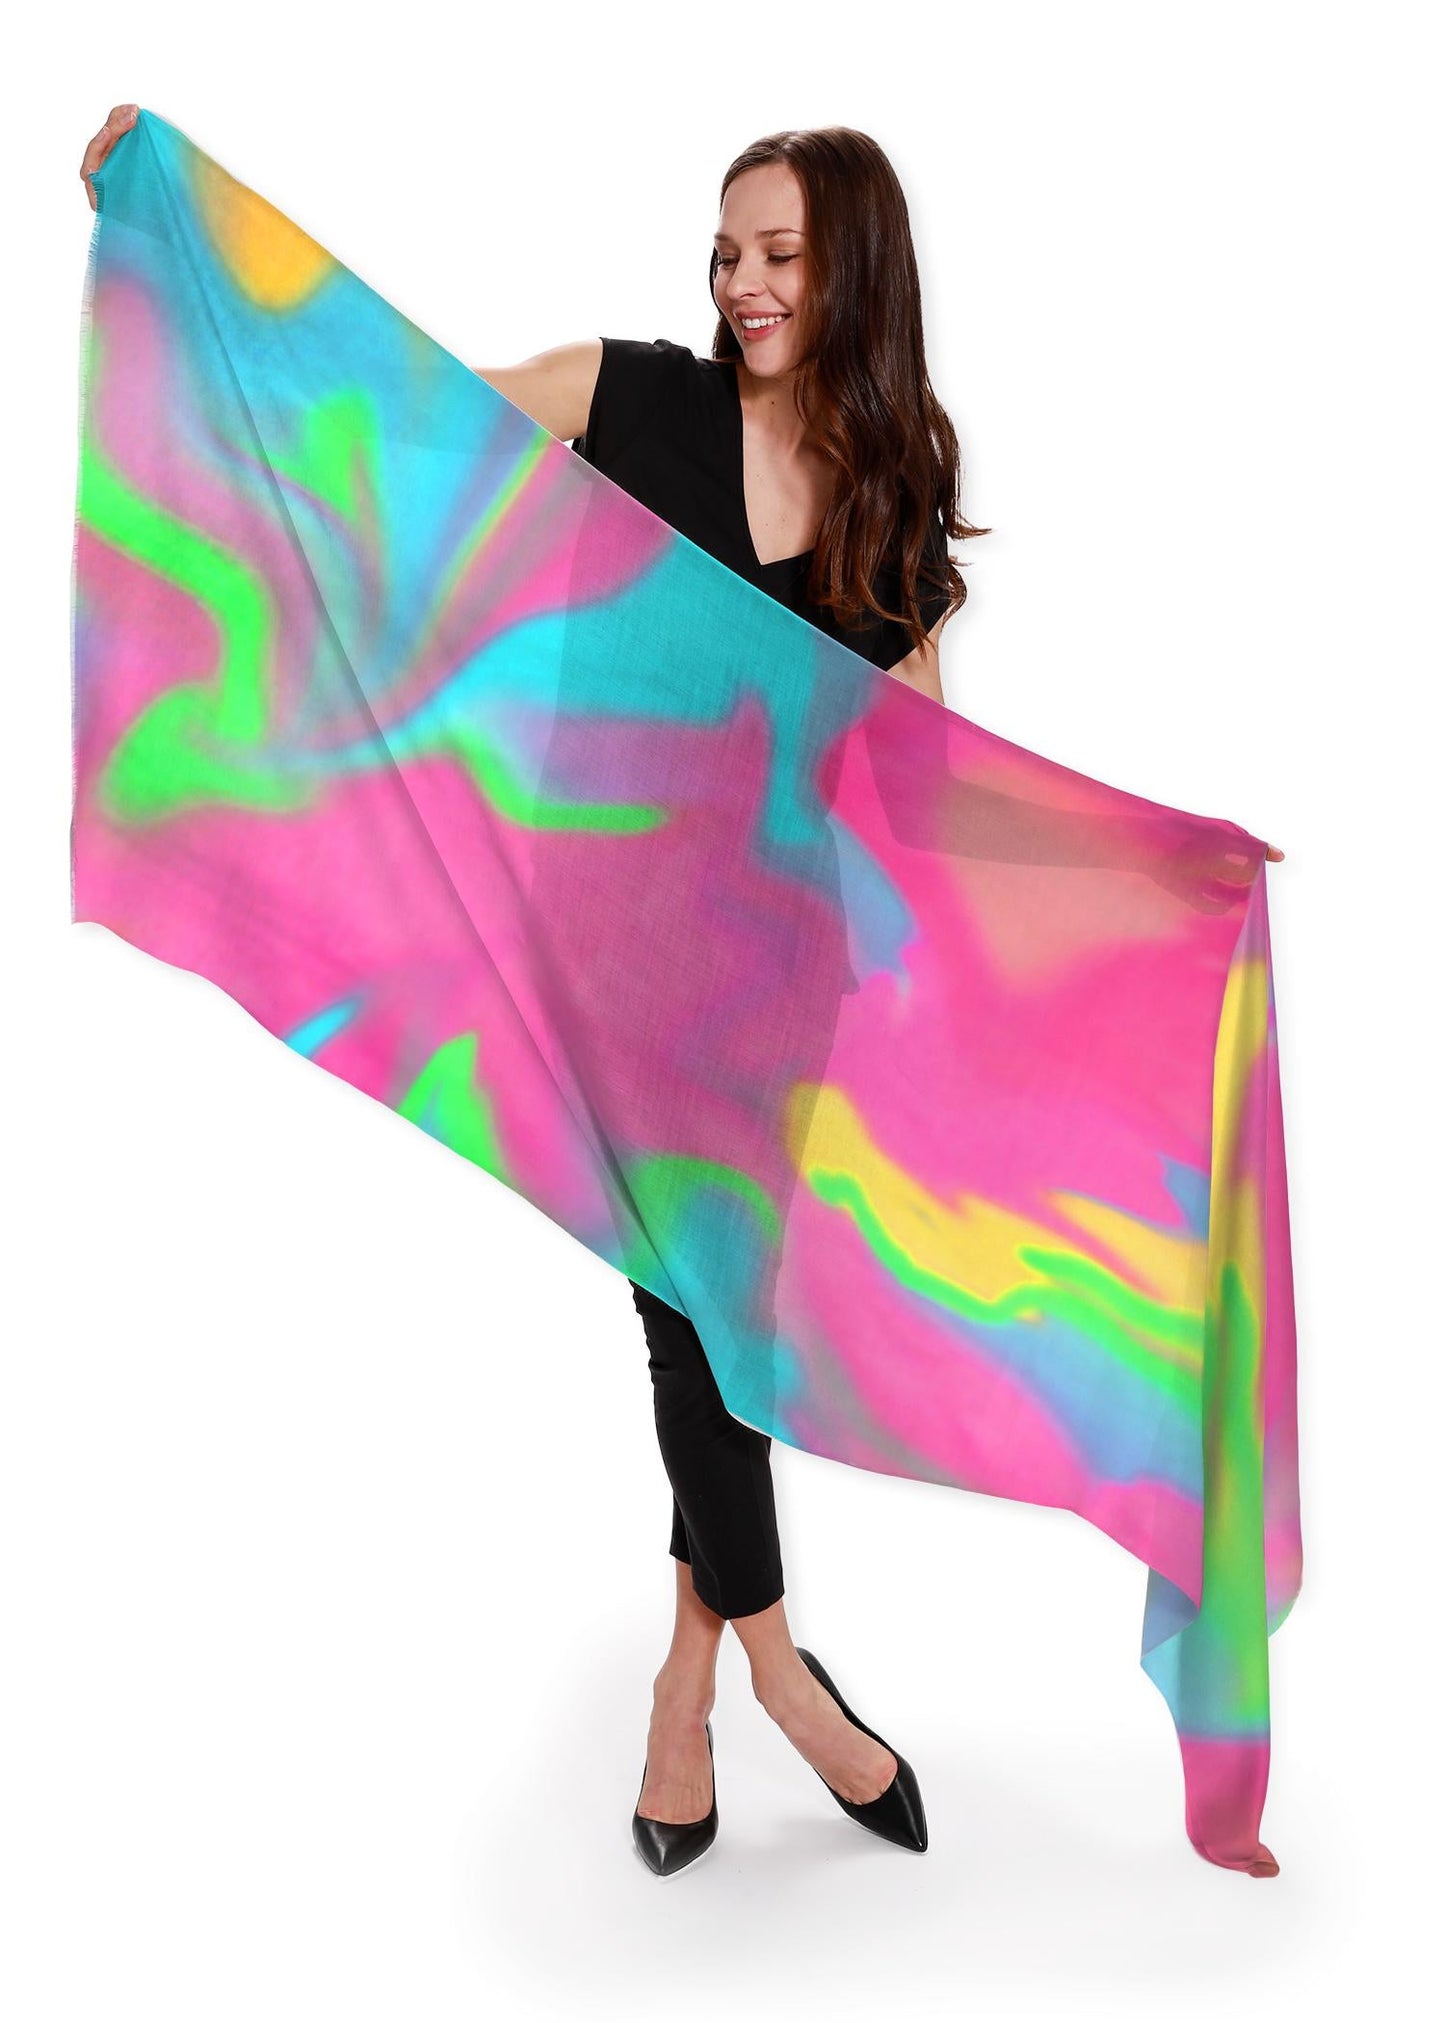 Large luxury sheer cashmere silk Scarf light weight wrap Plus size cover up top designer Barbie™ rainbow resort wear direct from Designer